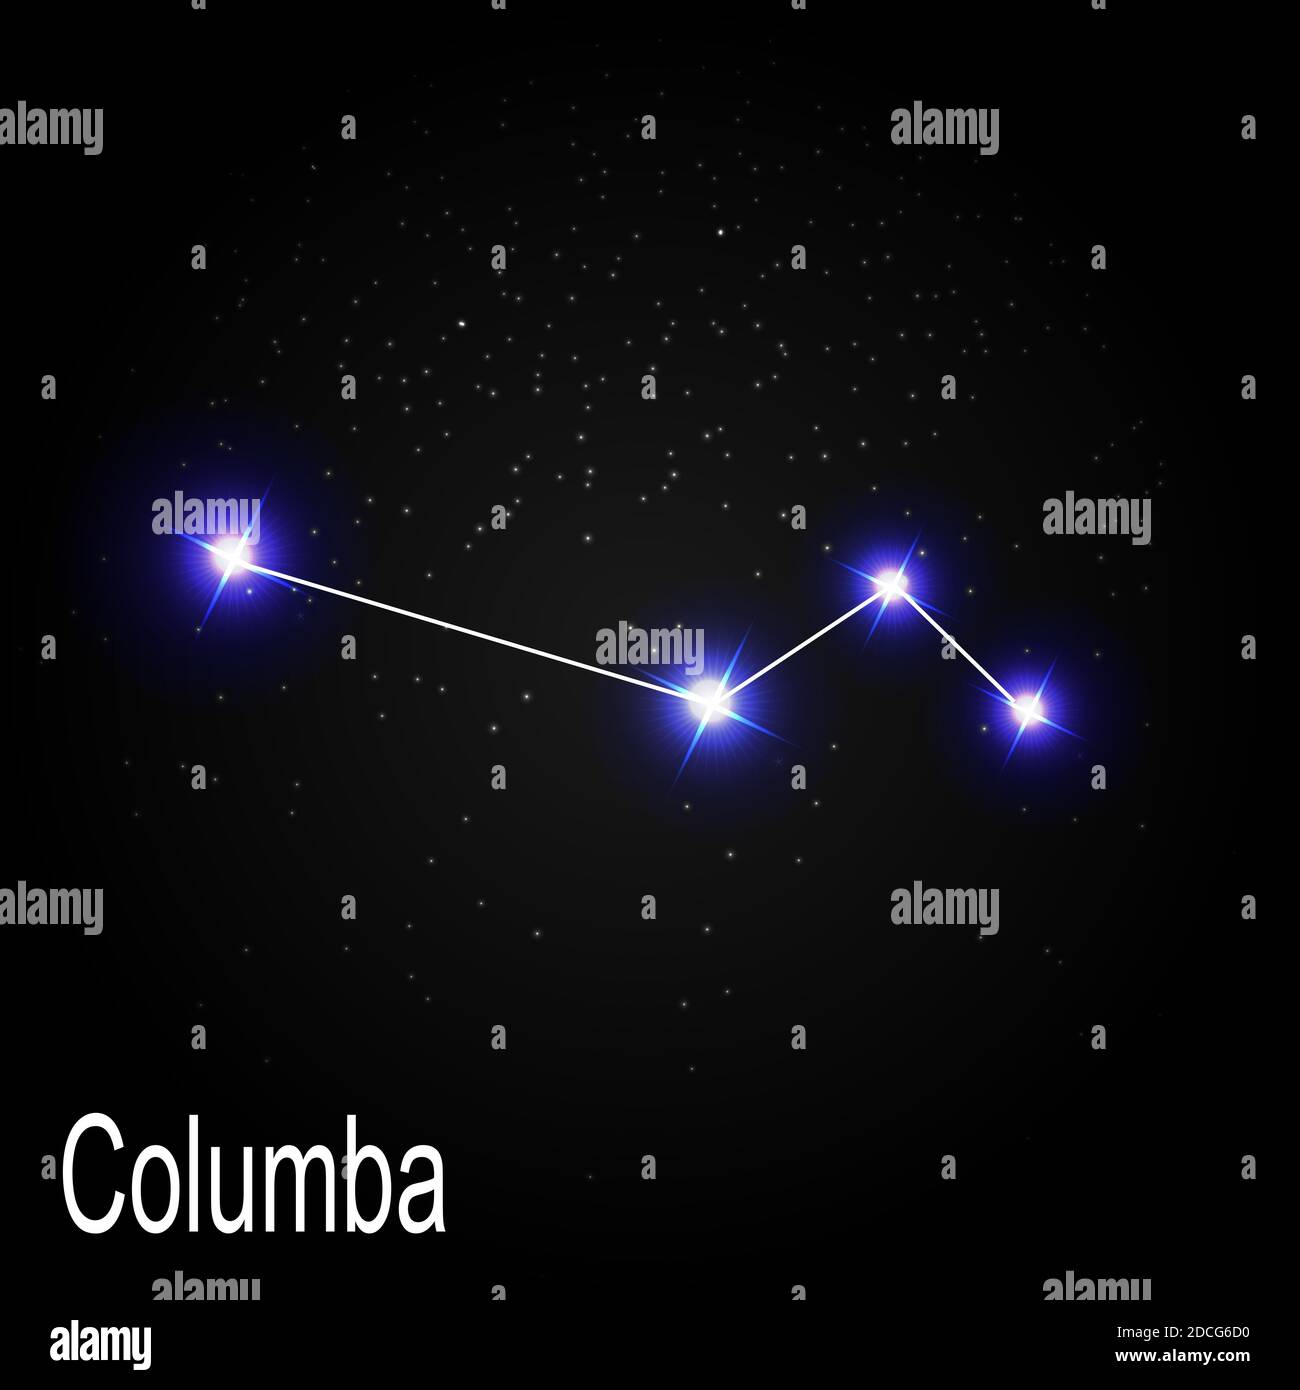 Columba Constellation with Beautiful Bright Stars on the Background of Cosmic Sky Illustration Stock Photo